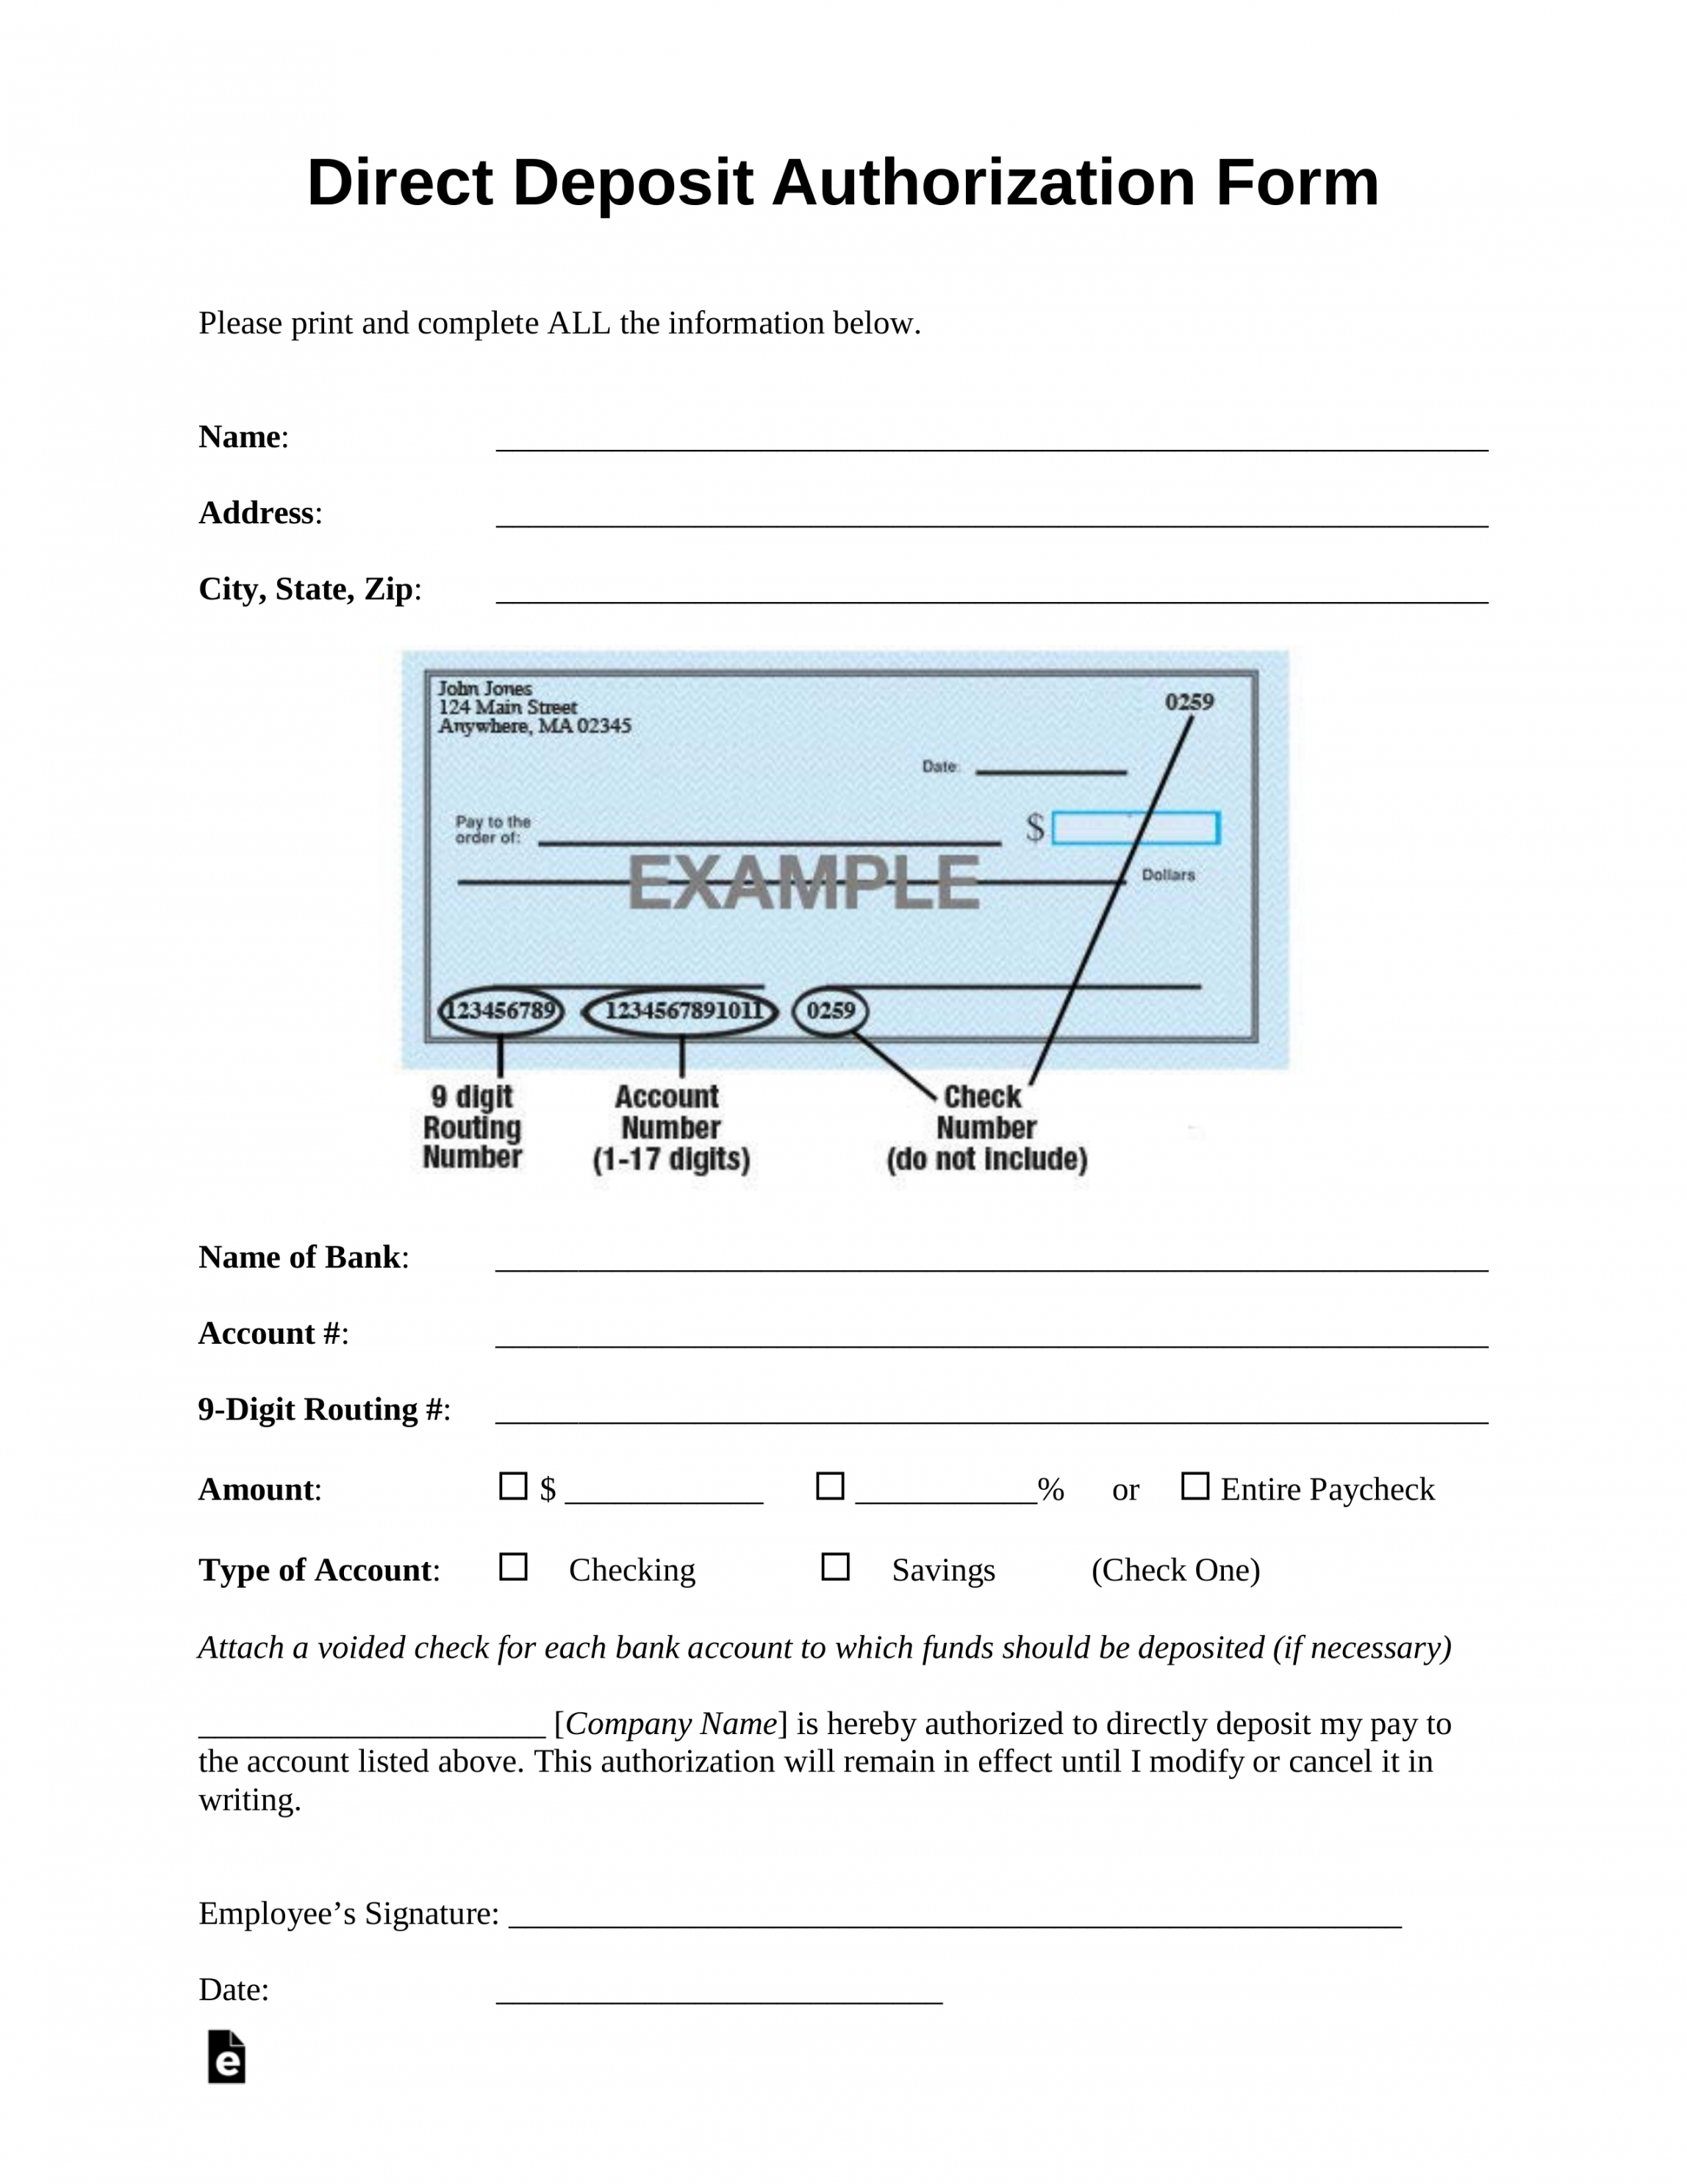 free direct deposit authorization forms  pdf  word direct deposit request form template example